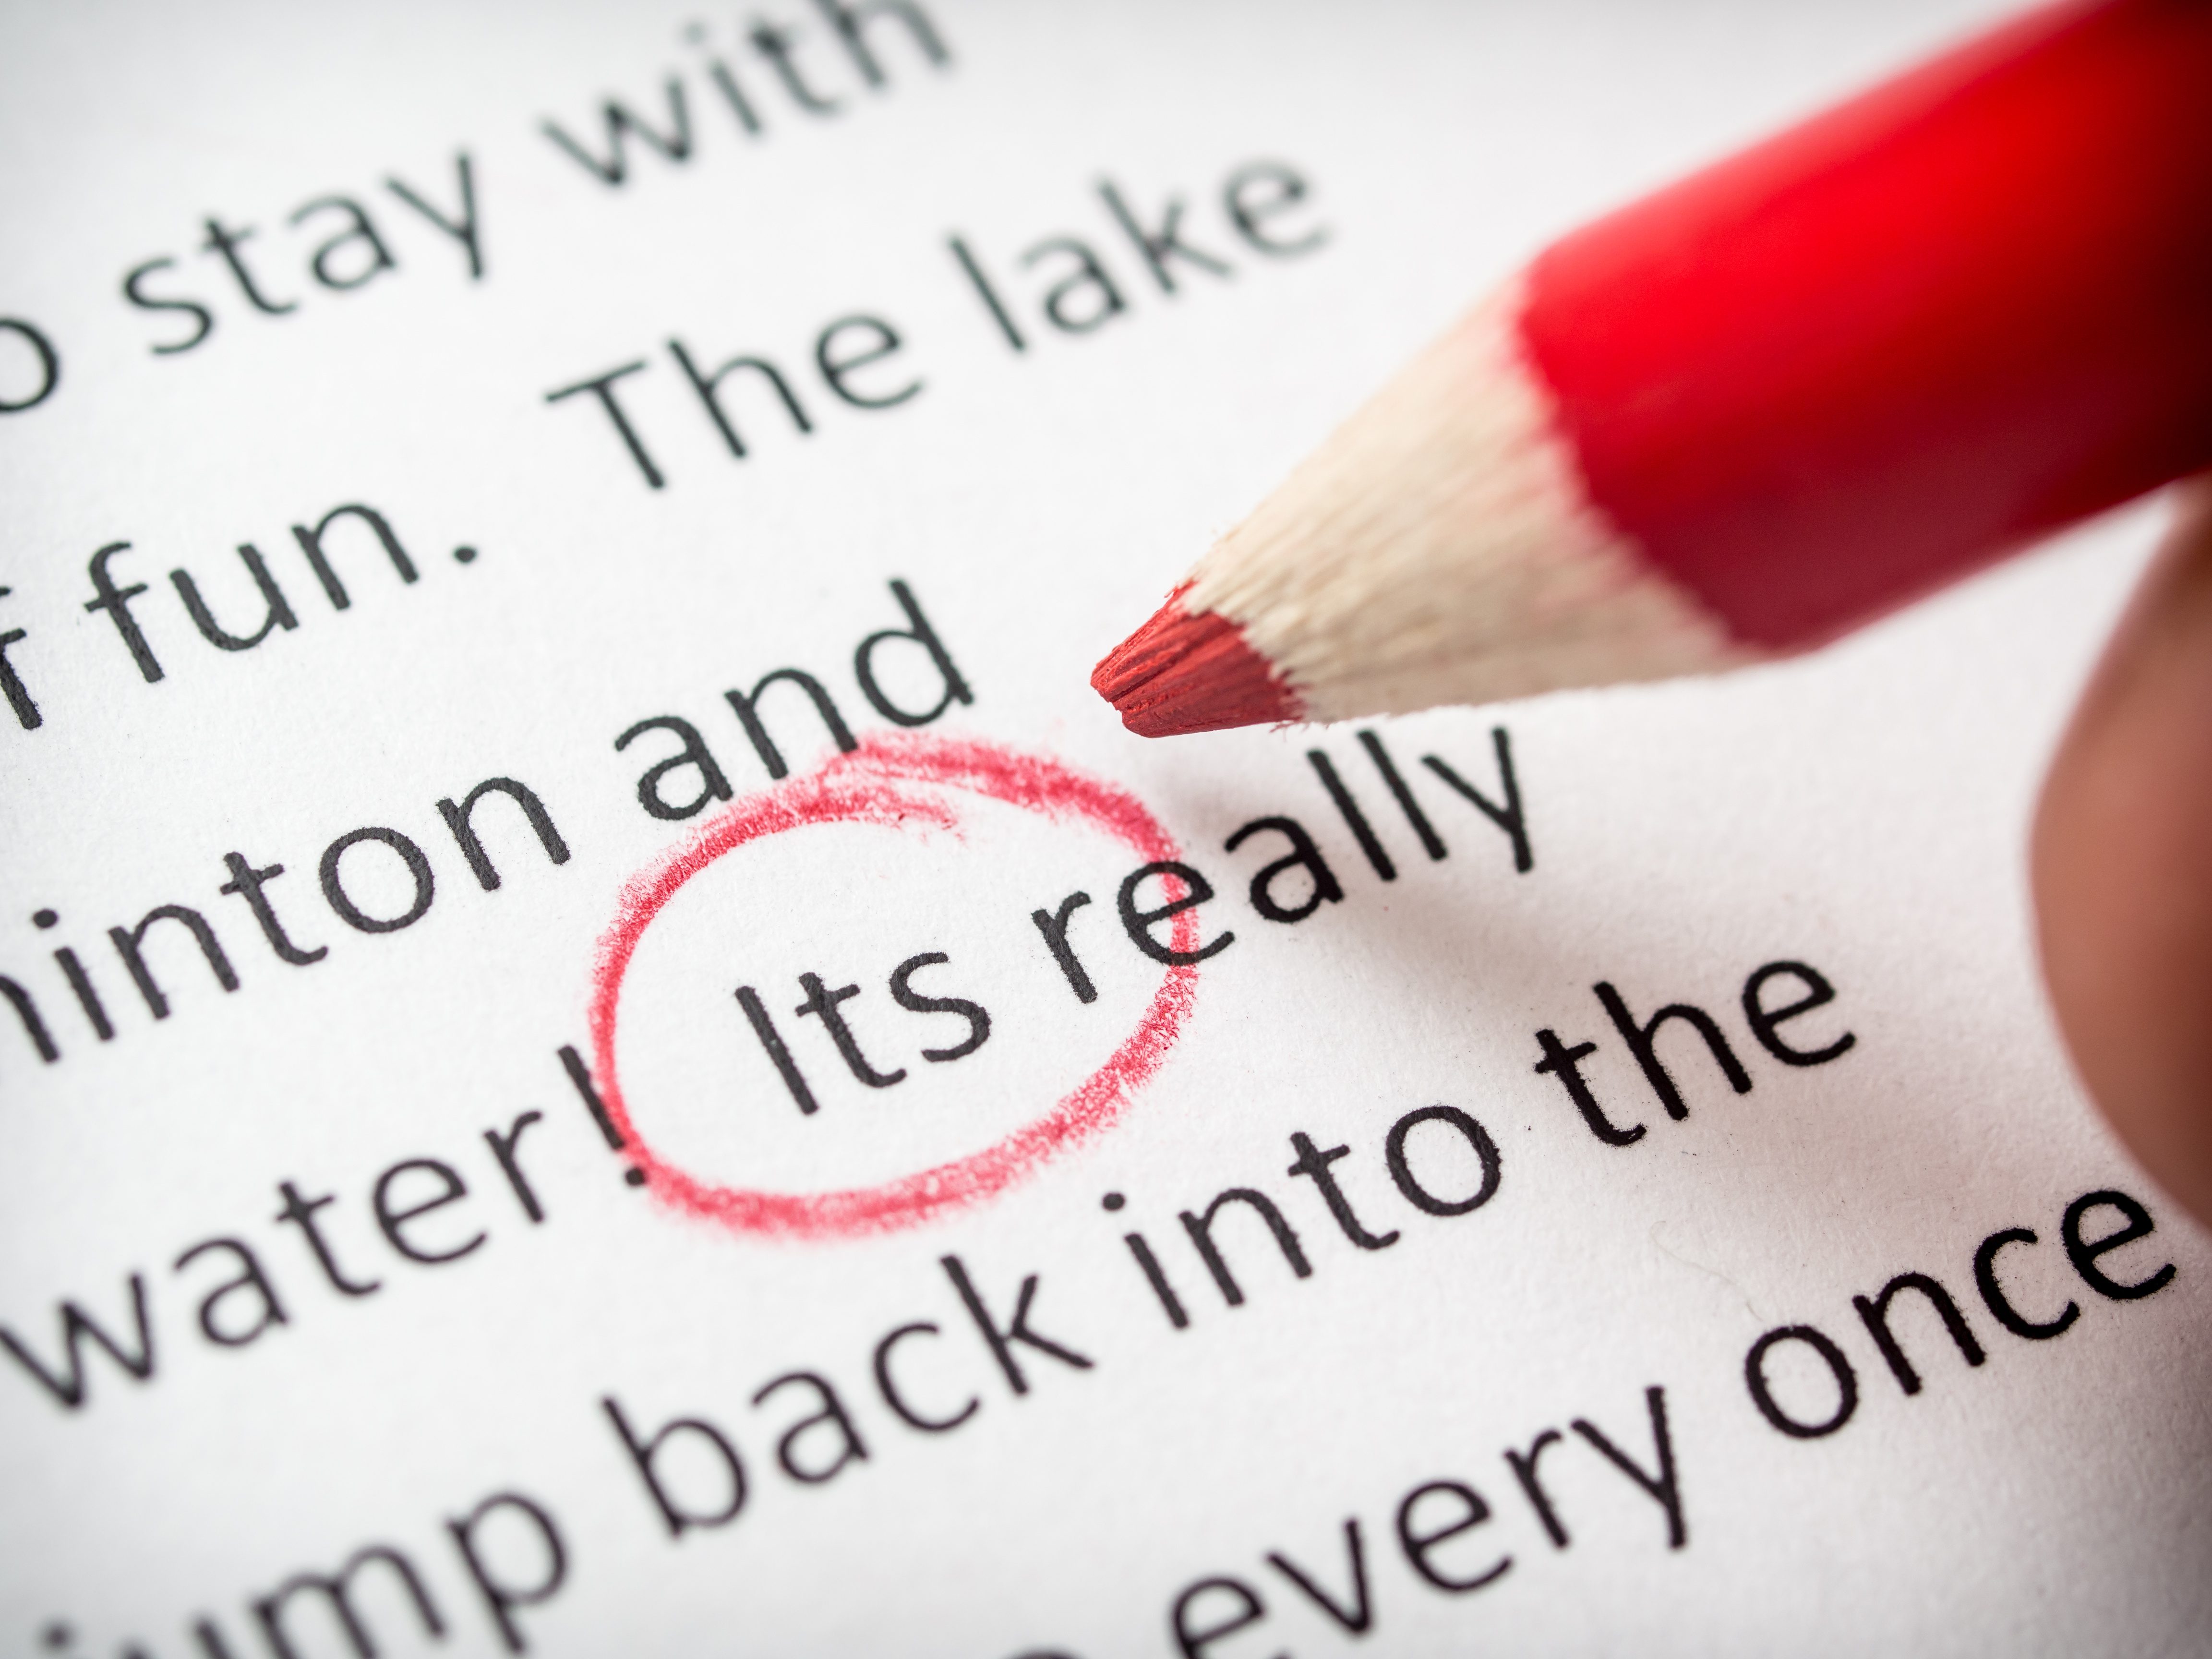 proofreading your paper